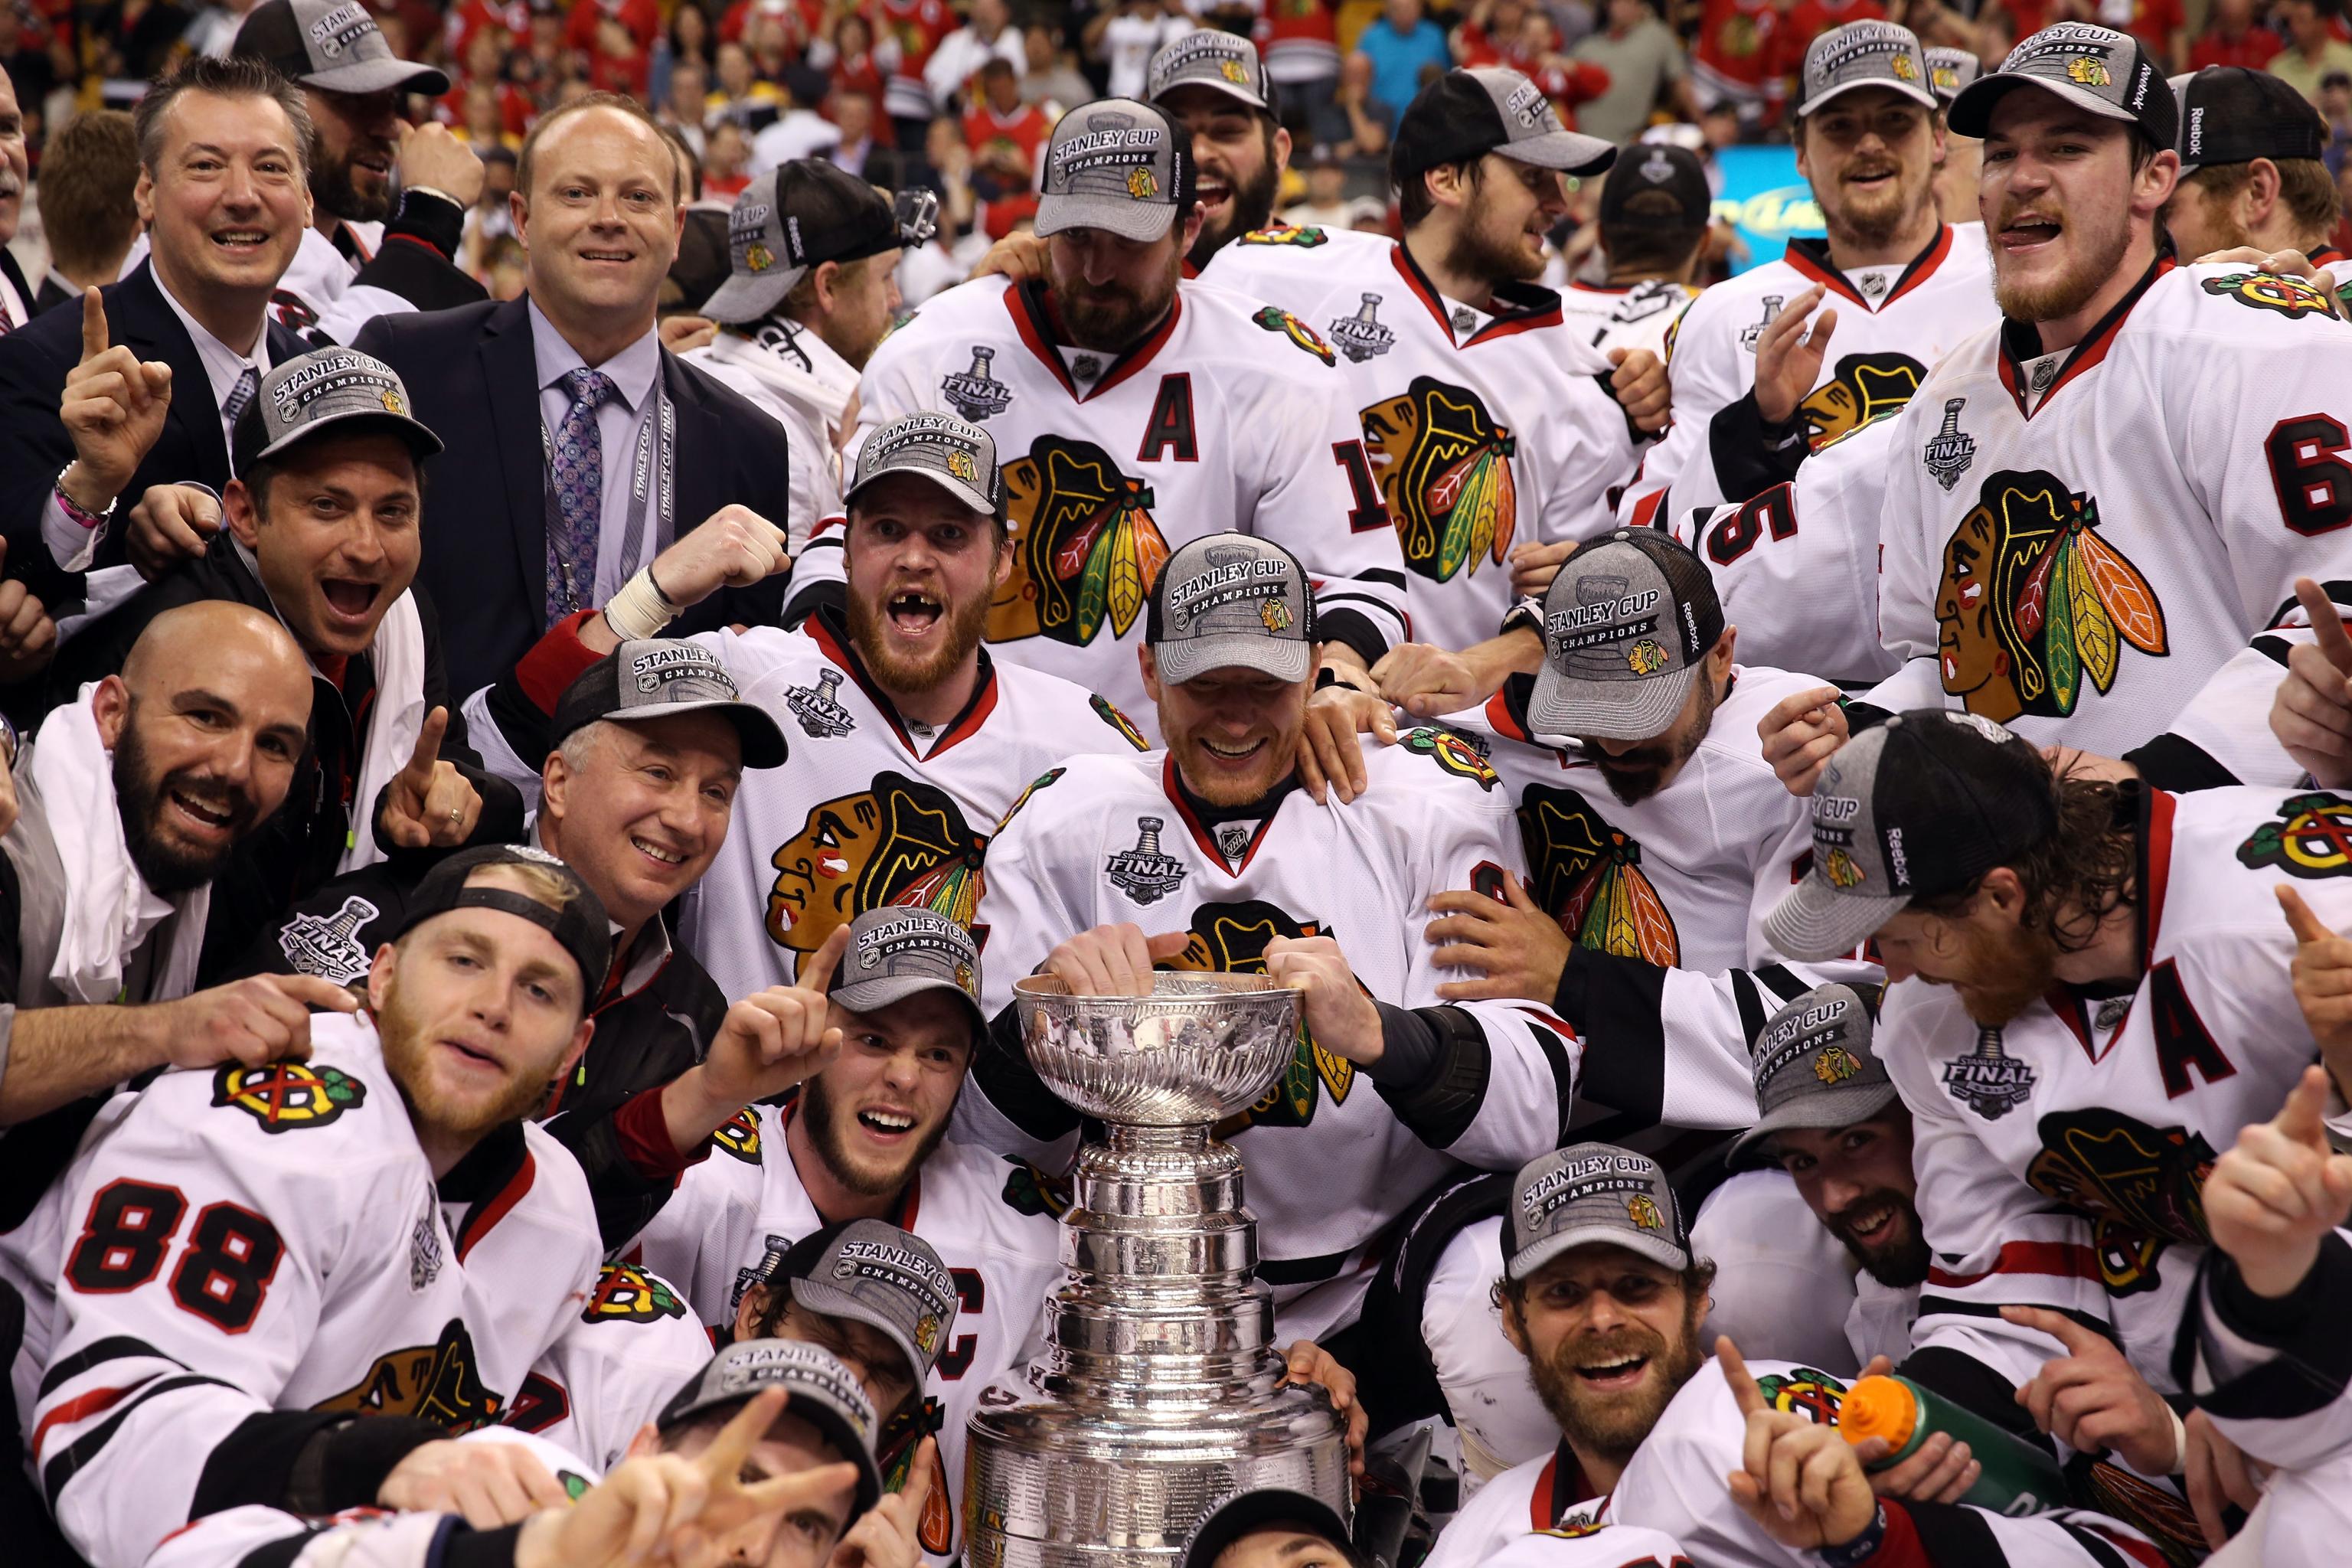 With Blackhawks' 3 Stanley Cups in 6 Years, Chicago Runneth Over - The New  York Times